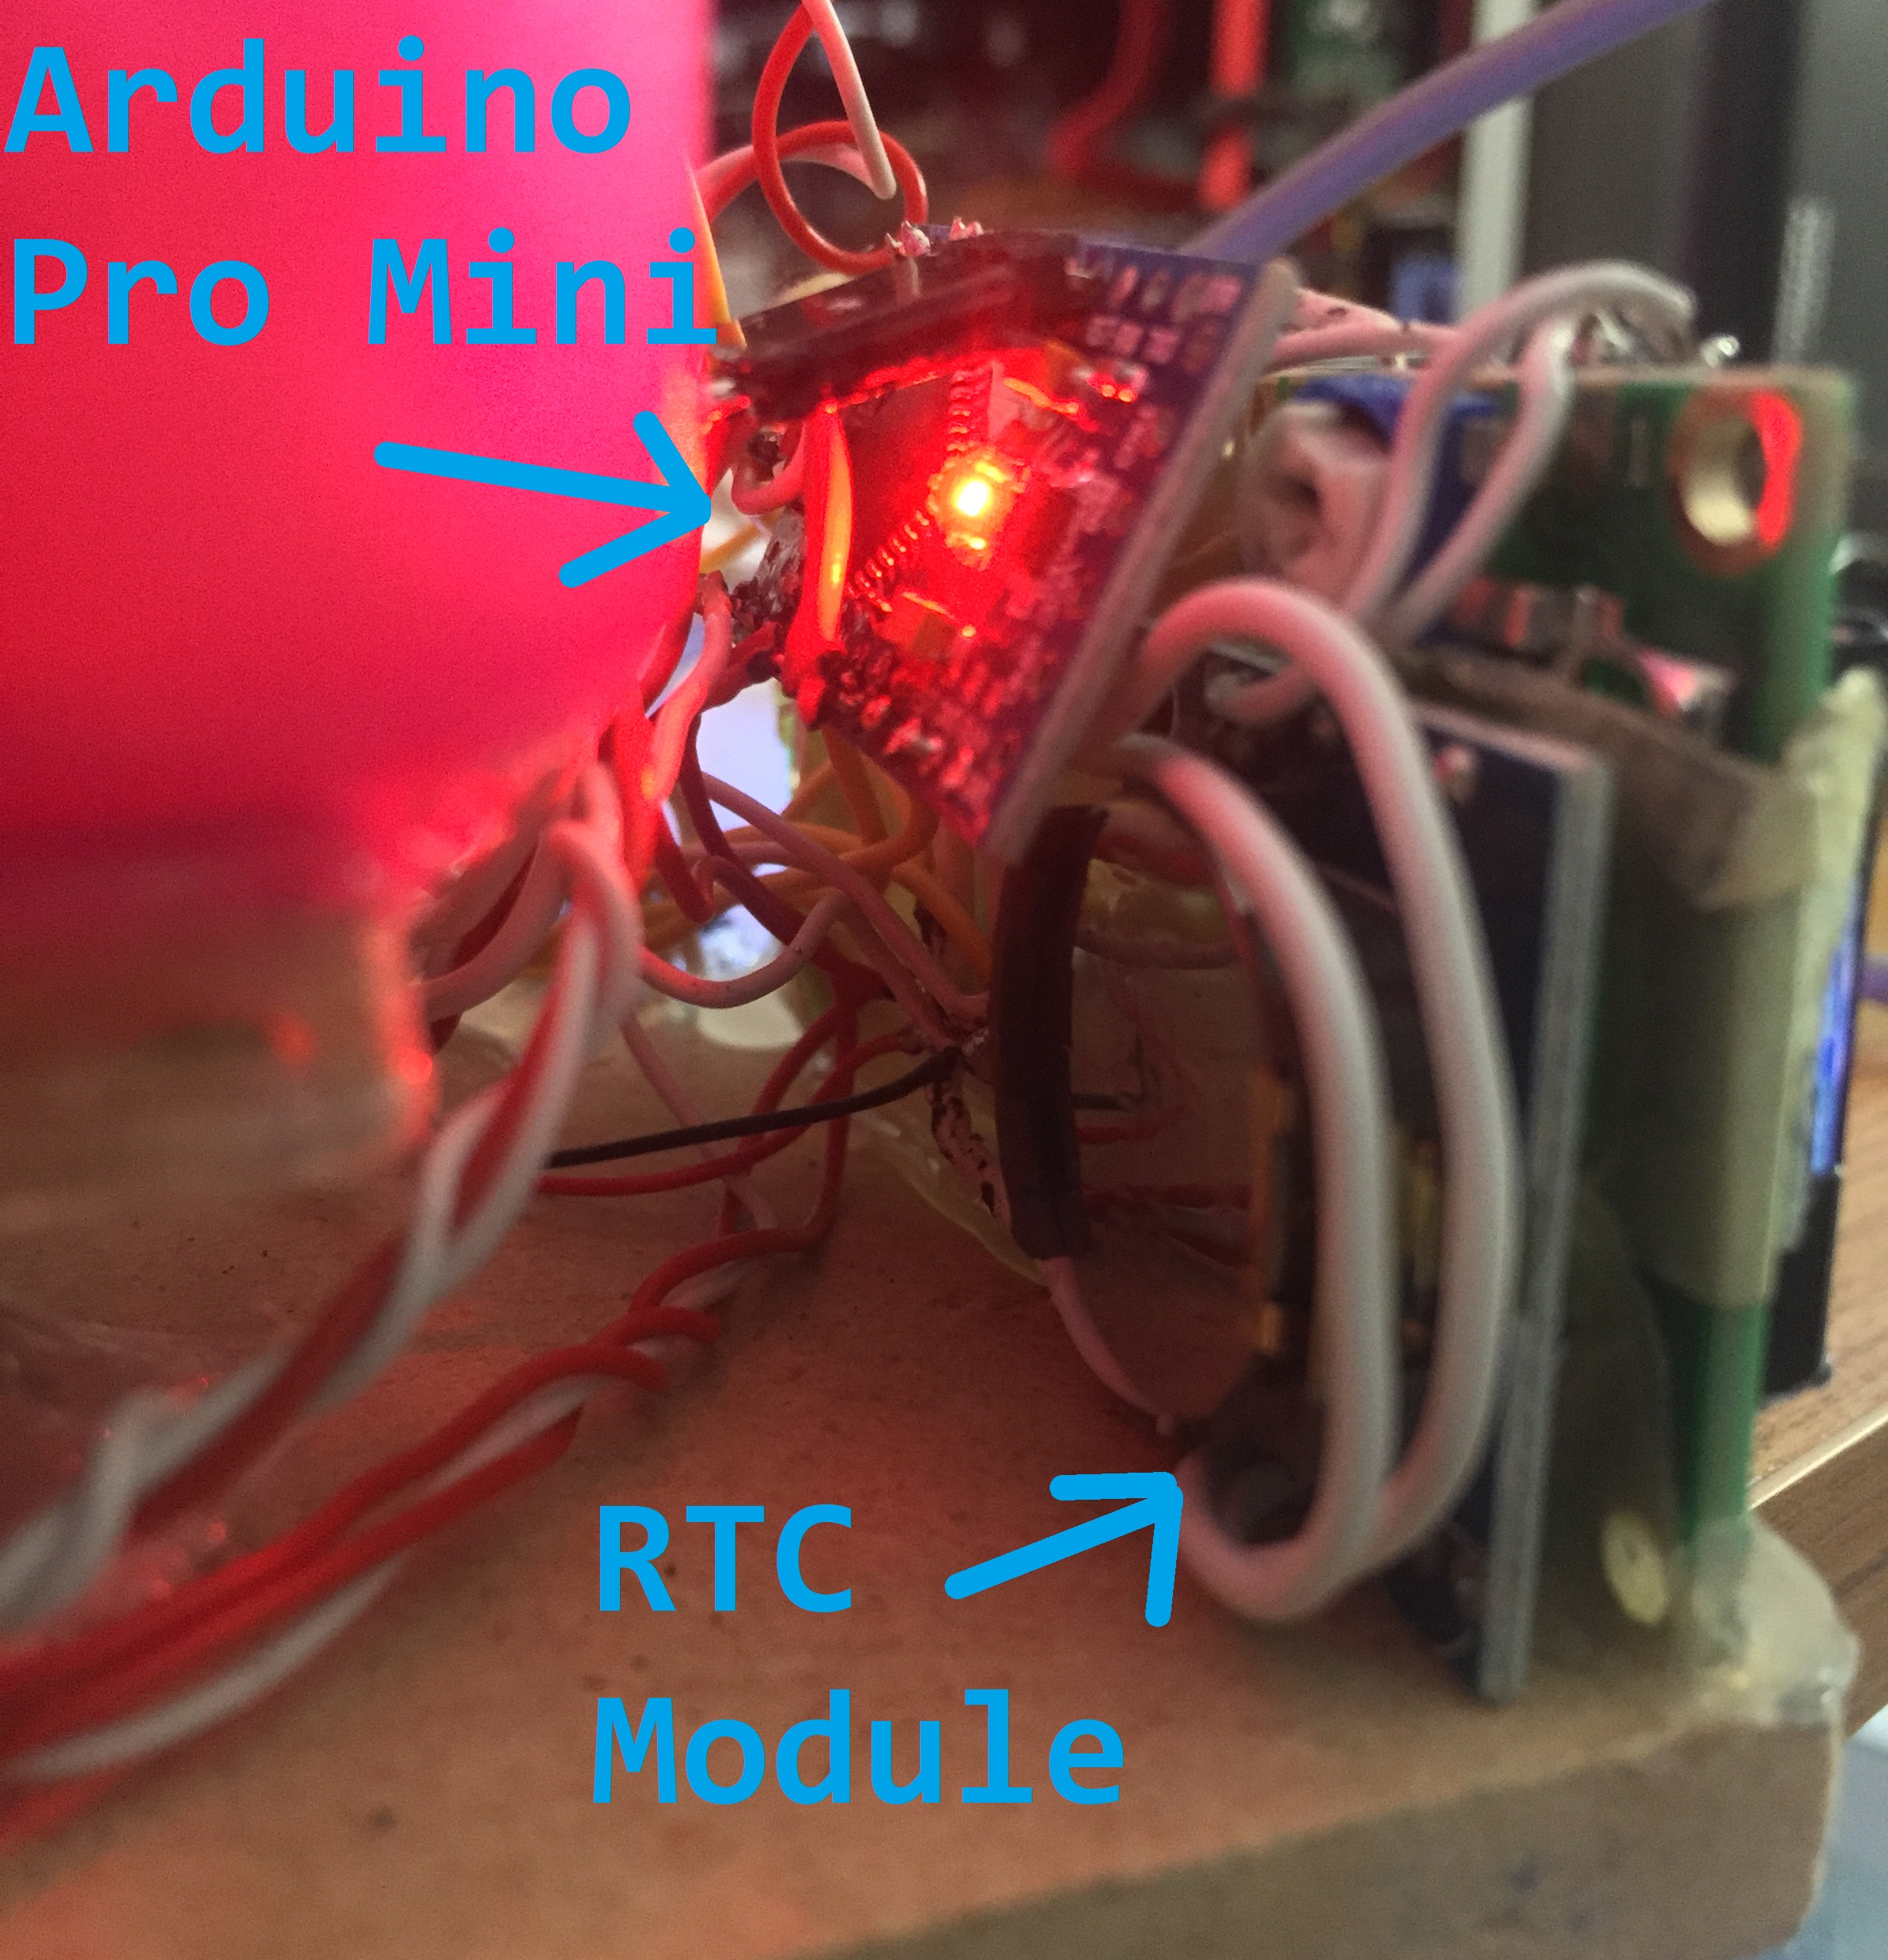 A labeled image showing off the arduino components